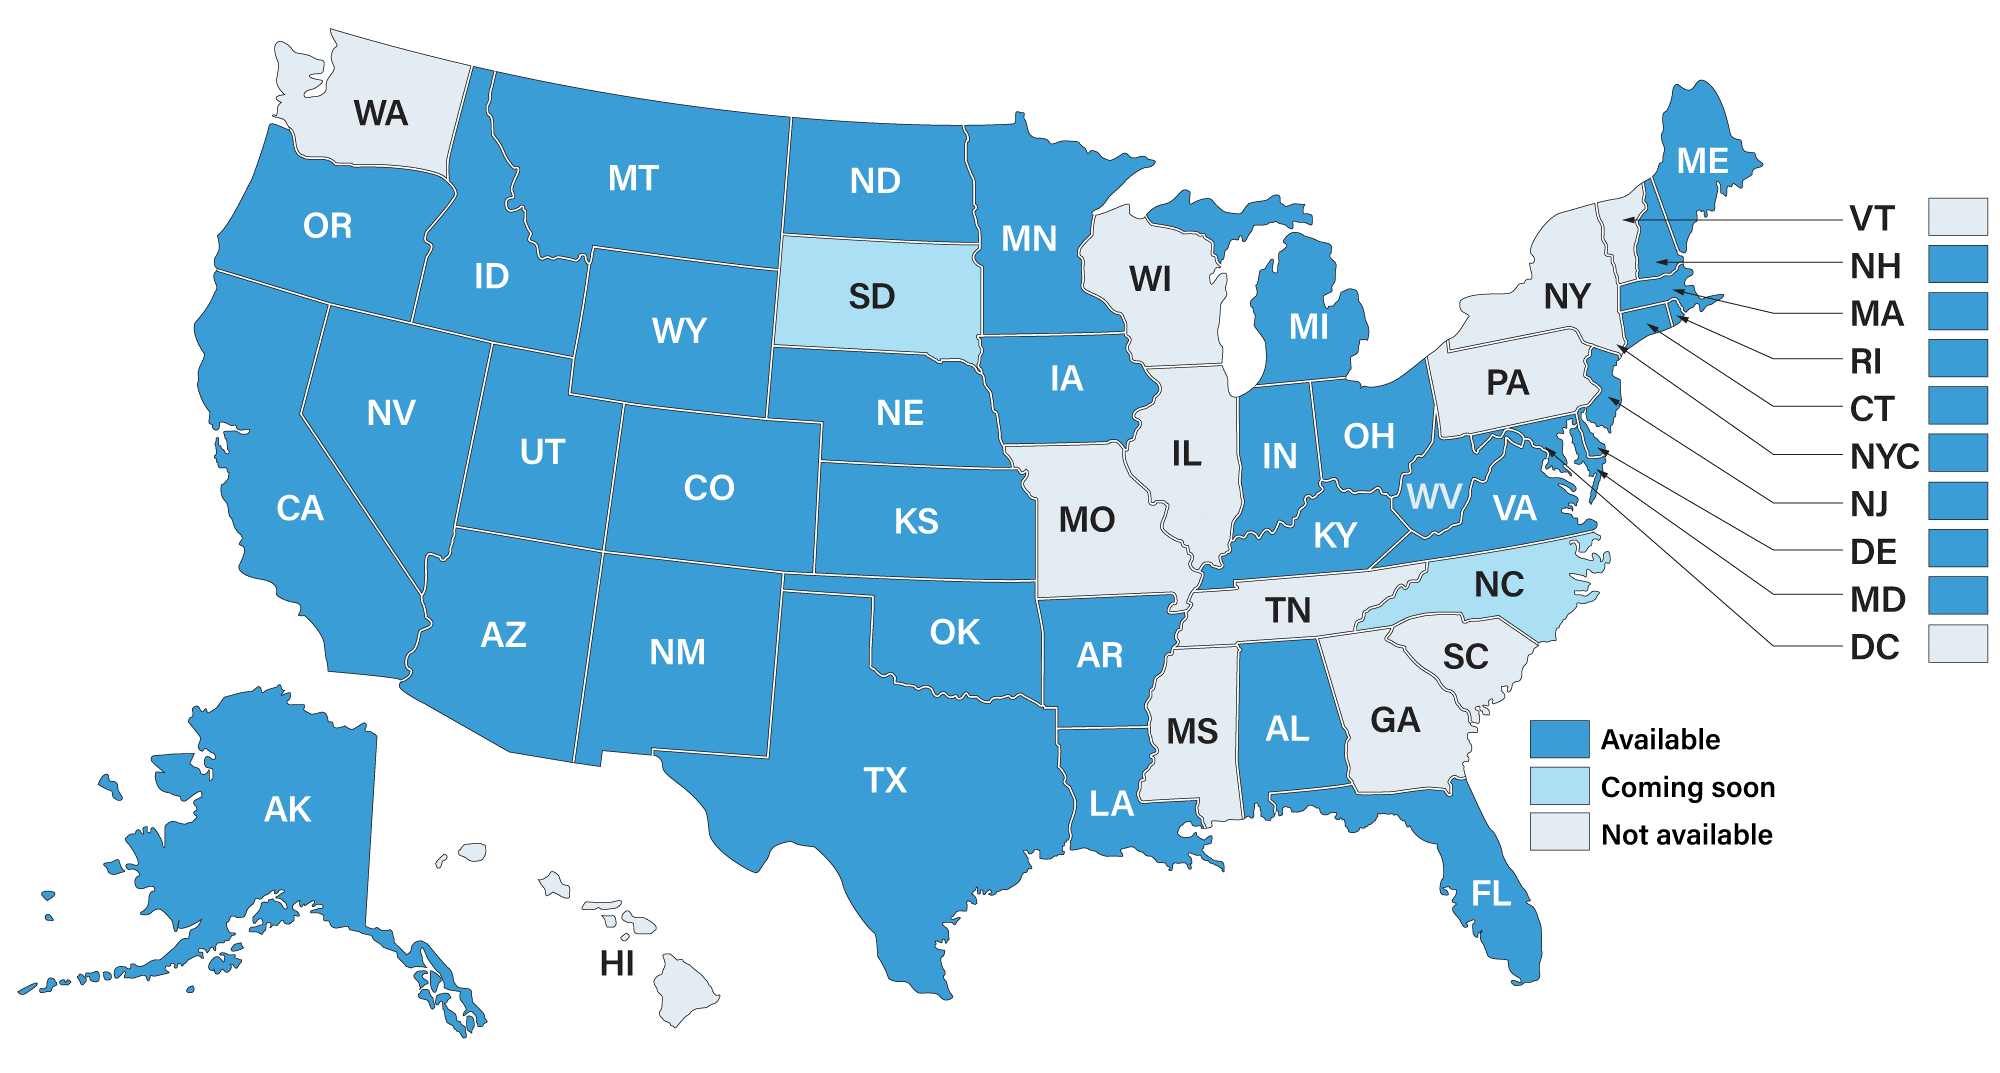 Immunization Link availability by US State